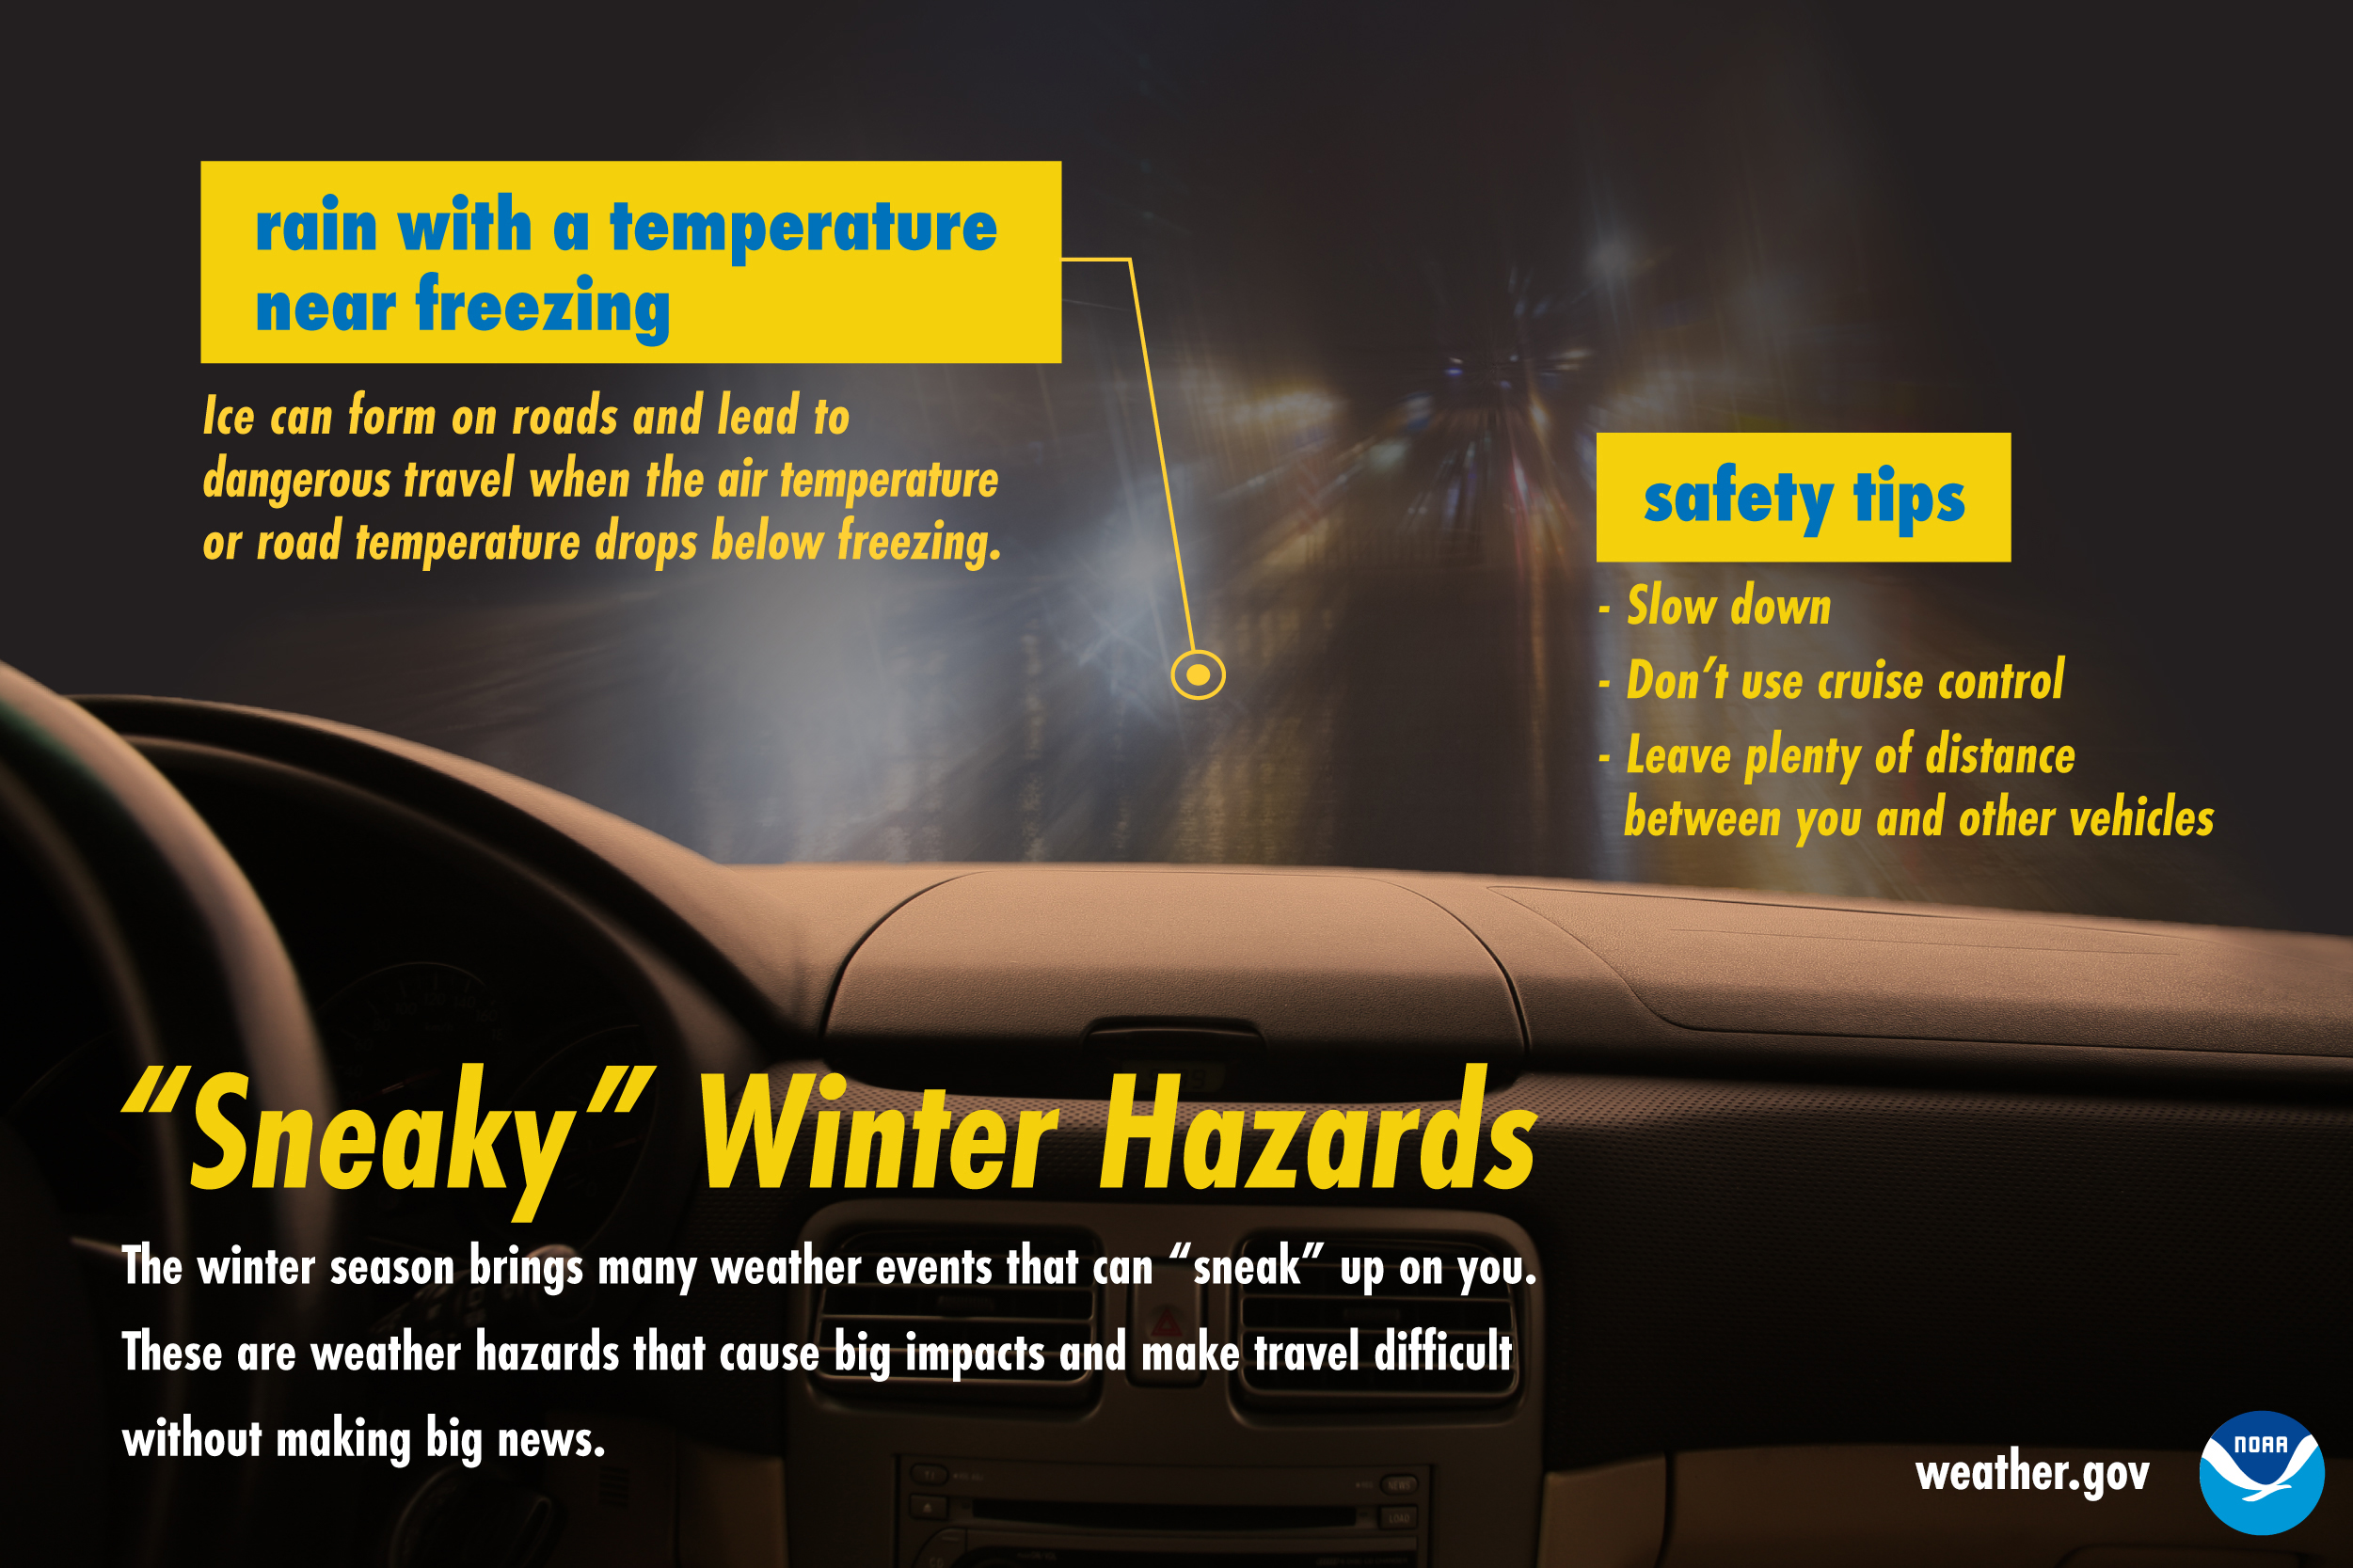 Sneaky Winter Hazards: Rain with a temperature near freezing. Ice can form on roads and lead to dangerous travel when the air temperature or road temperature drops below freezing. Safety tips: slow down; don't use cruise control; leave plenty of distance between you and other vehicles.